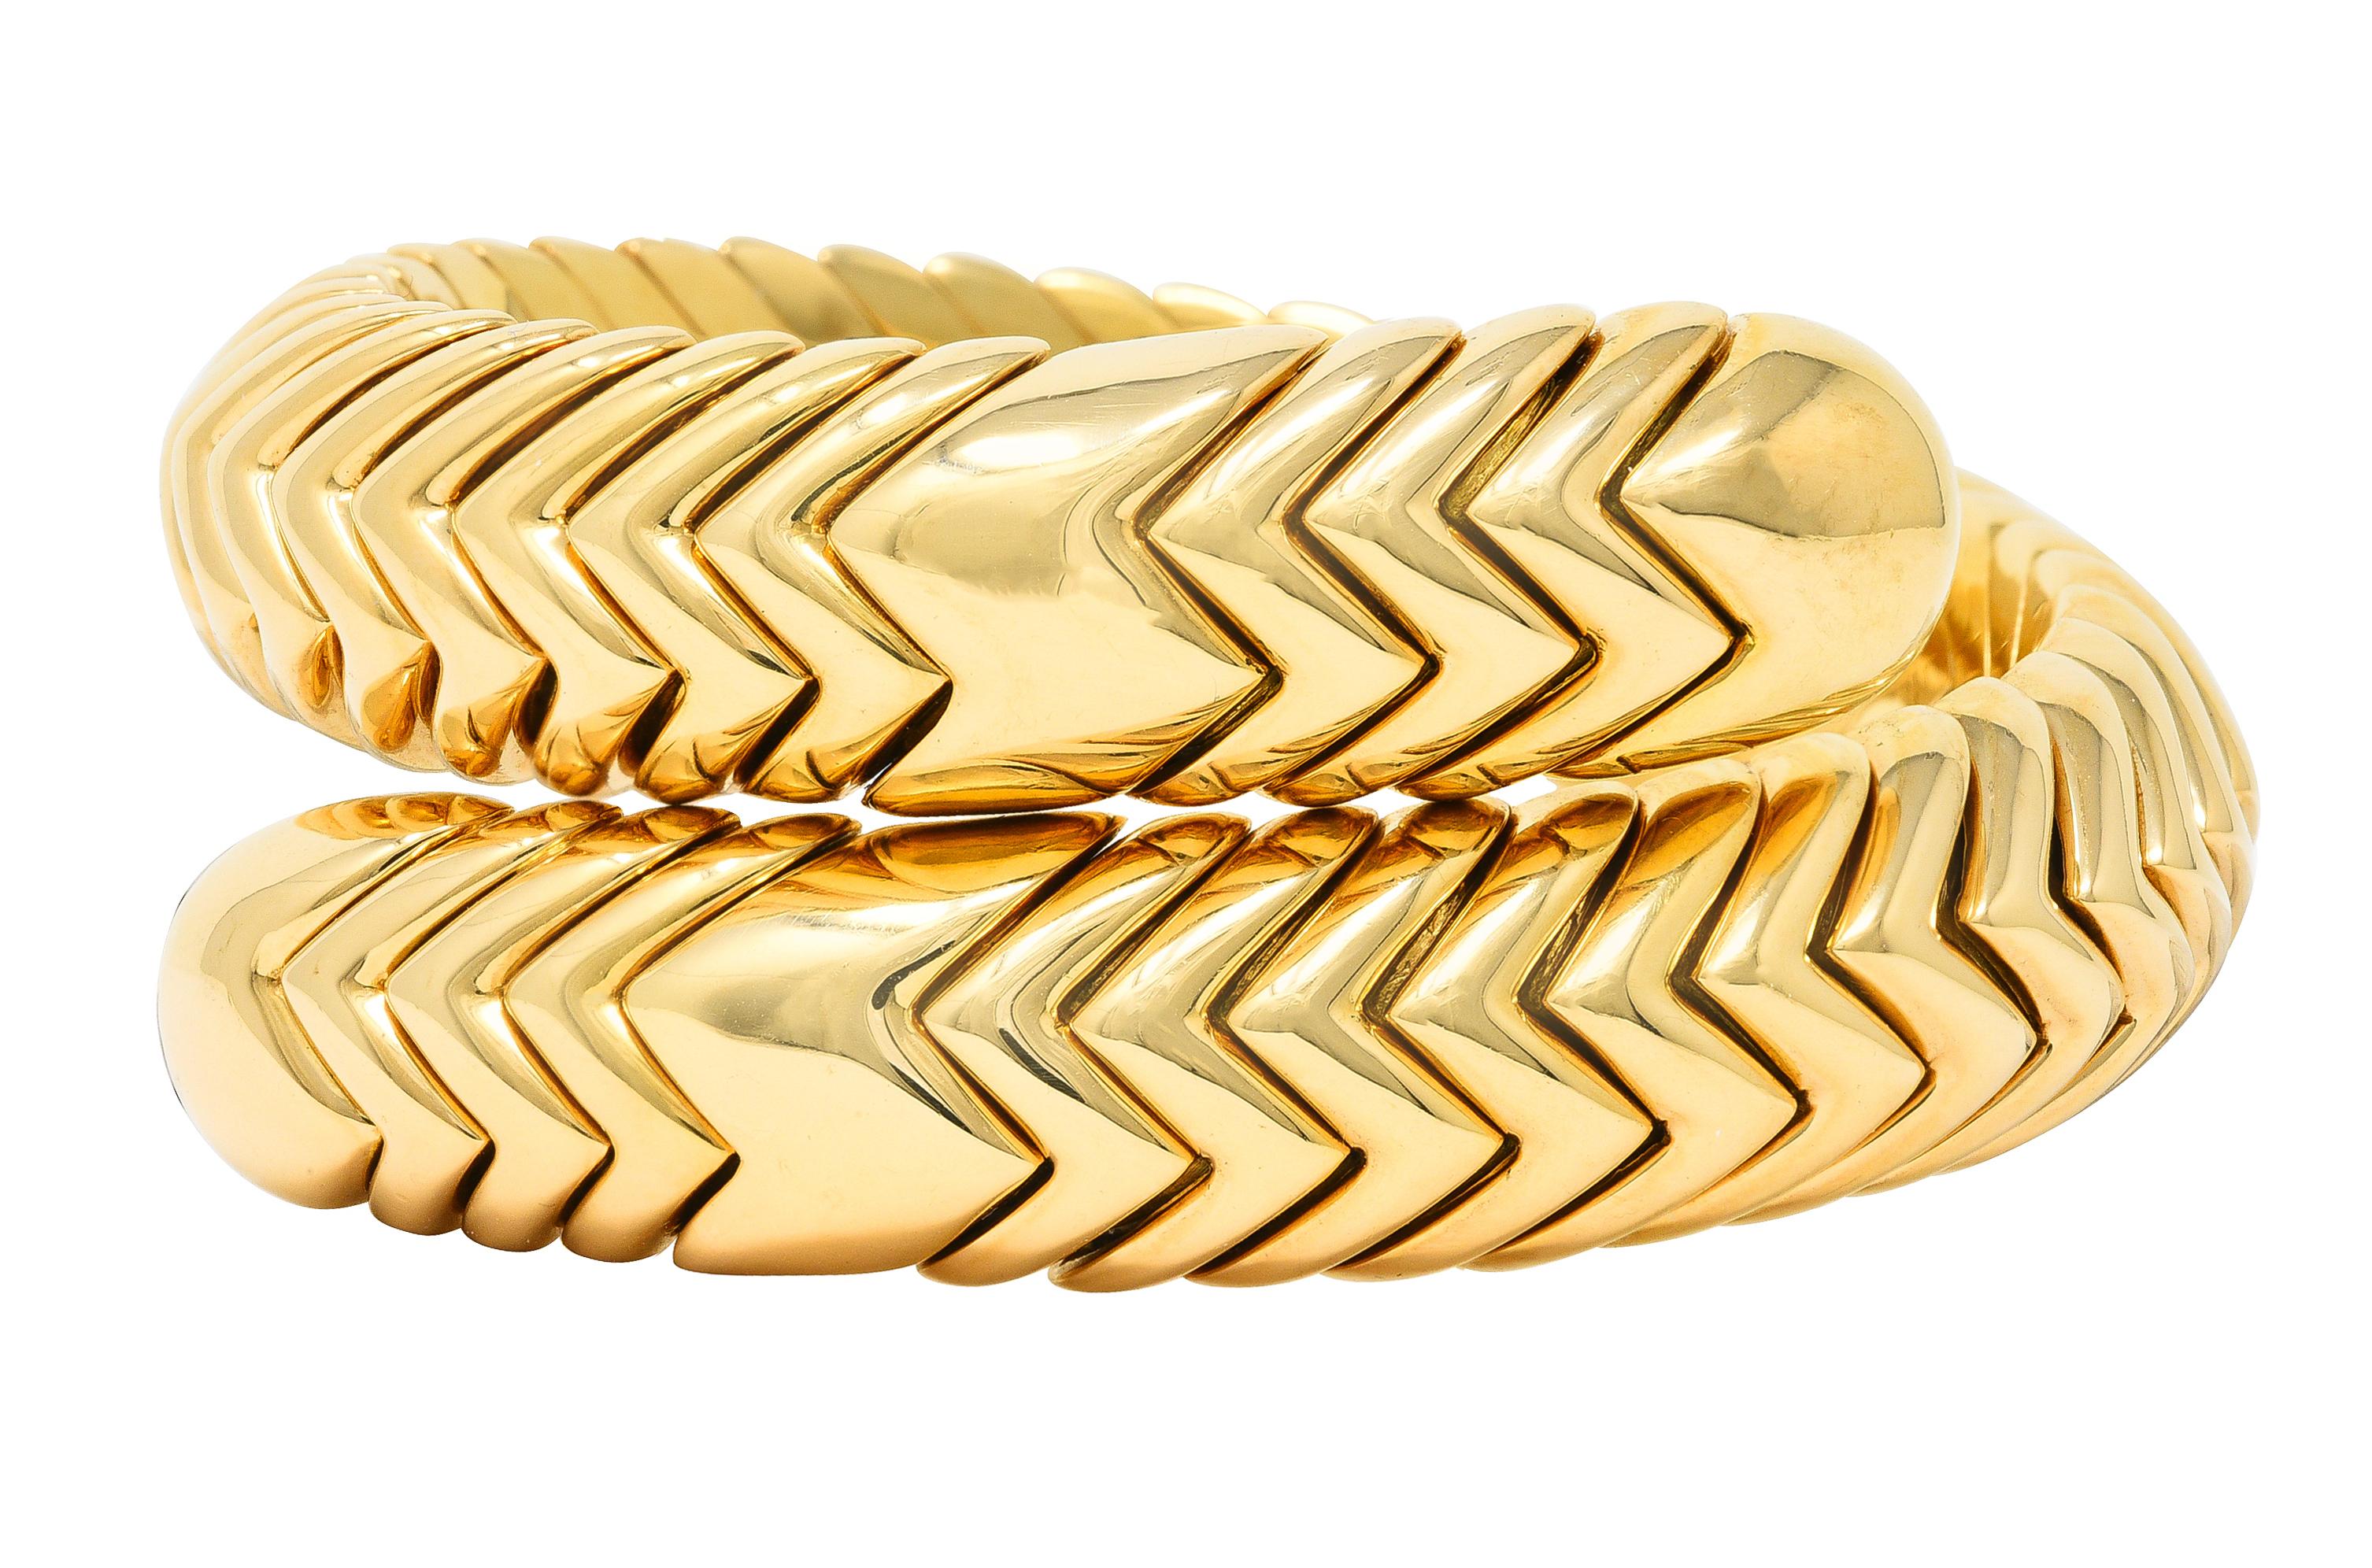 Bracelet is comprised of fitted chevron links - with considerable flex for wrapping. Featuring rounded bypass terminals. With high polish finish. Stamped 750 with Italian assay marks for 18 karat gold. Numbered and fully signed for Bvlgari. Circa: